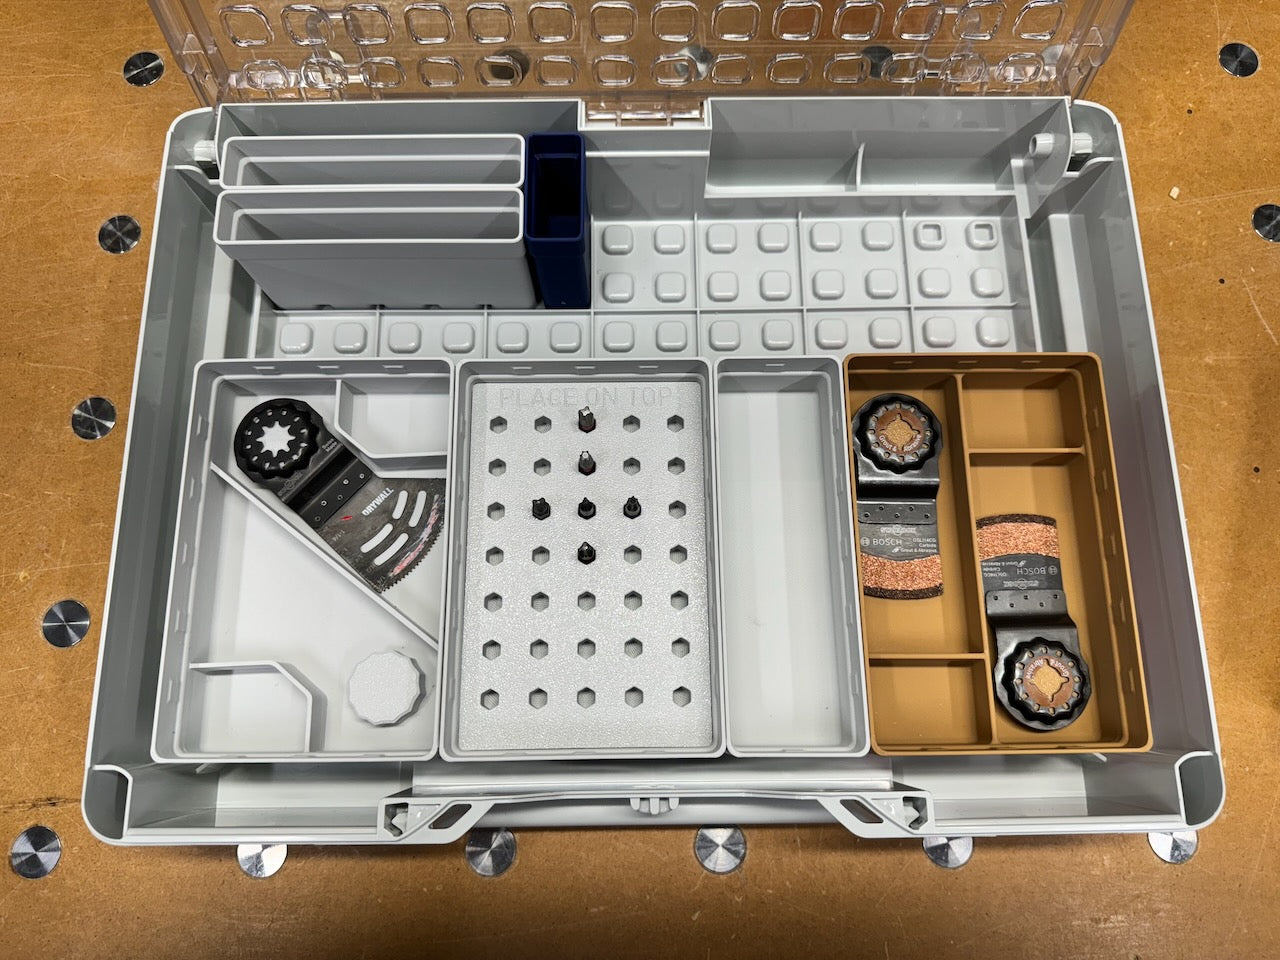 SYS-FIT - Bit Holder Bins for Systainer3 Organizer